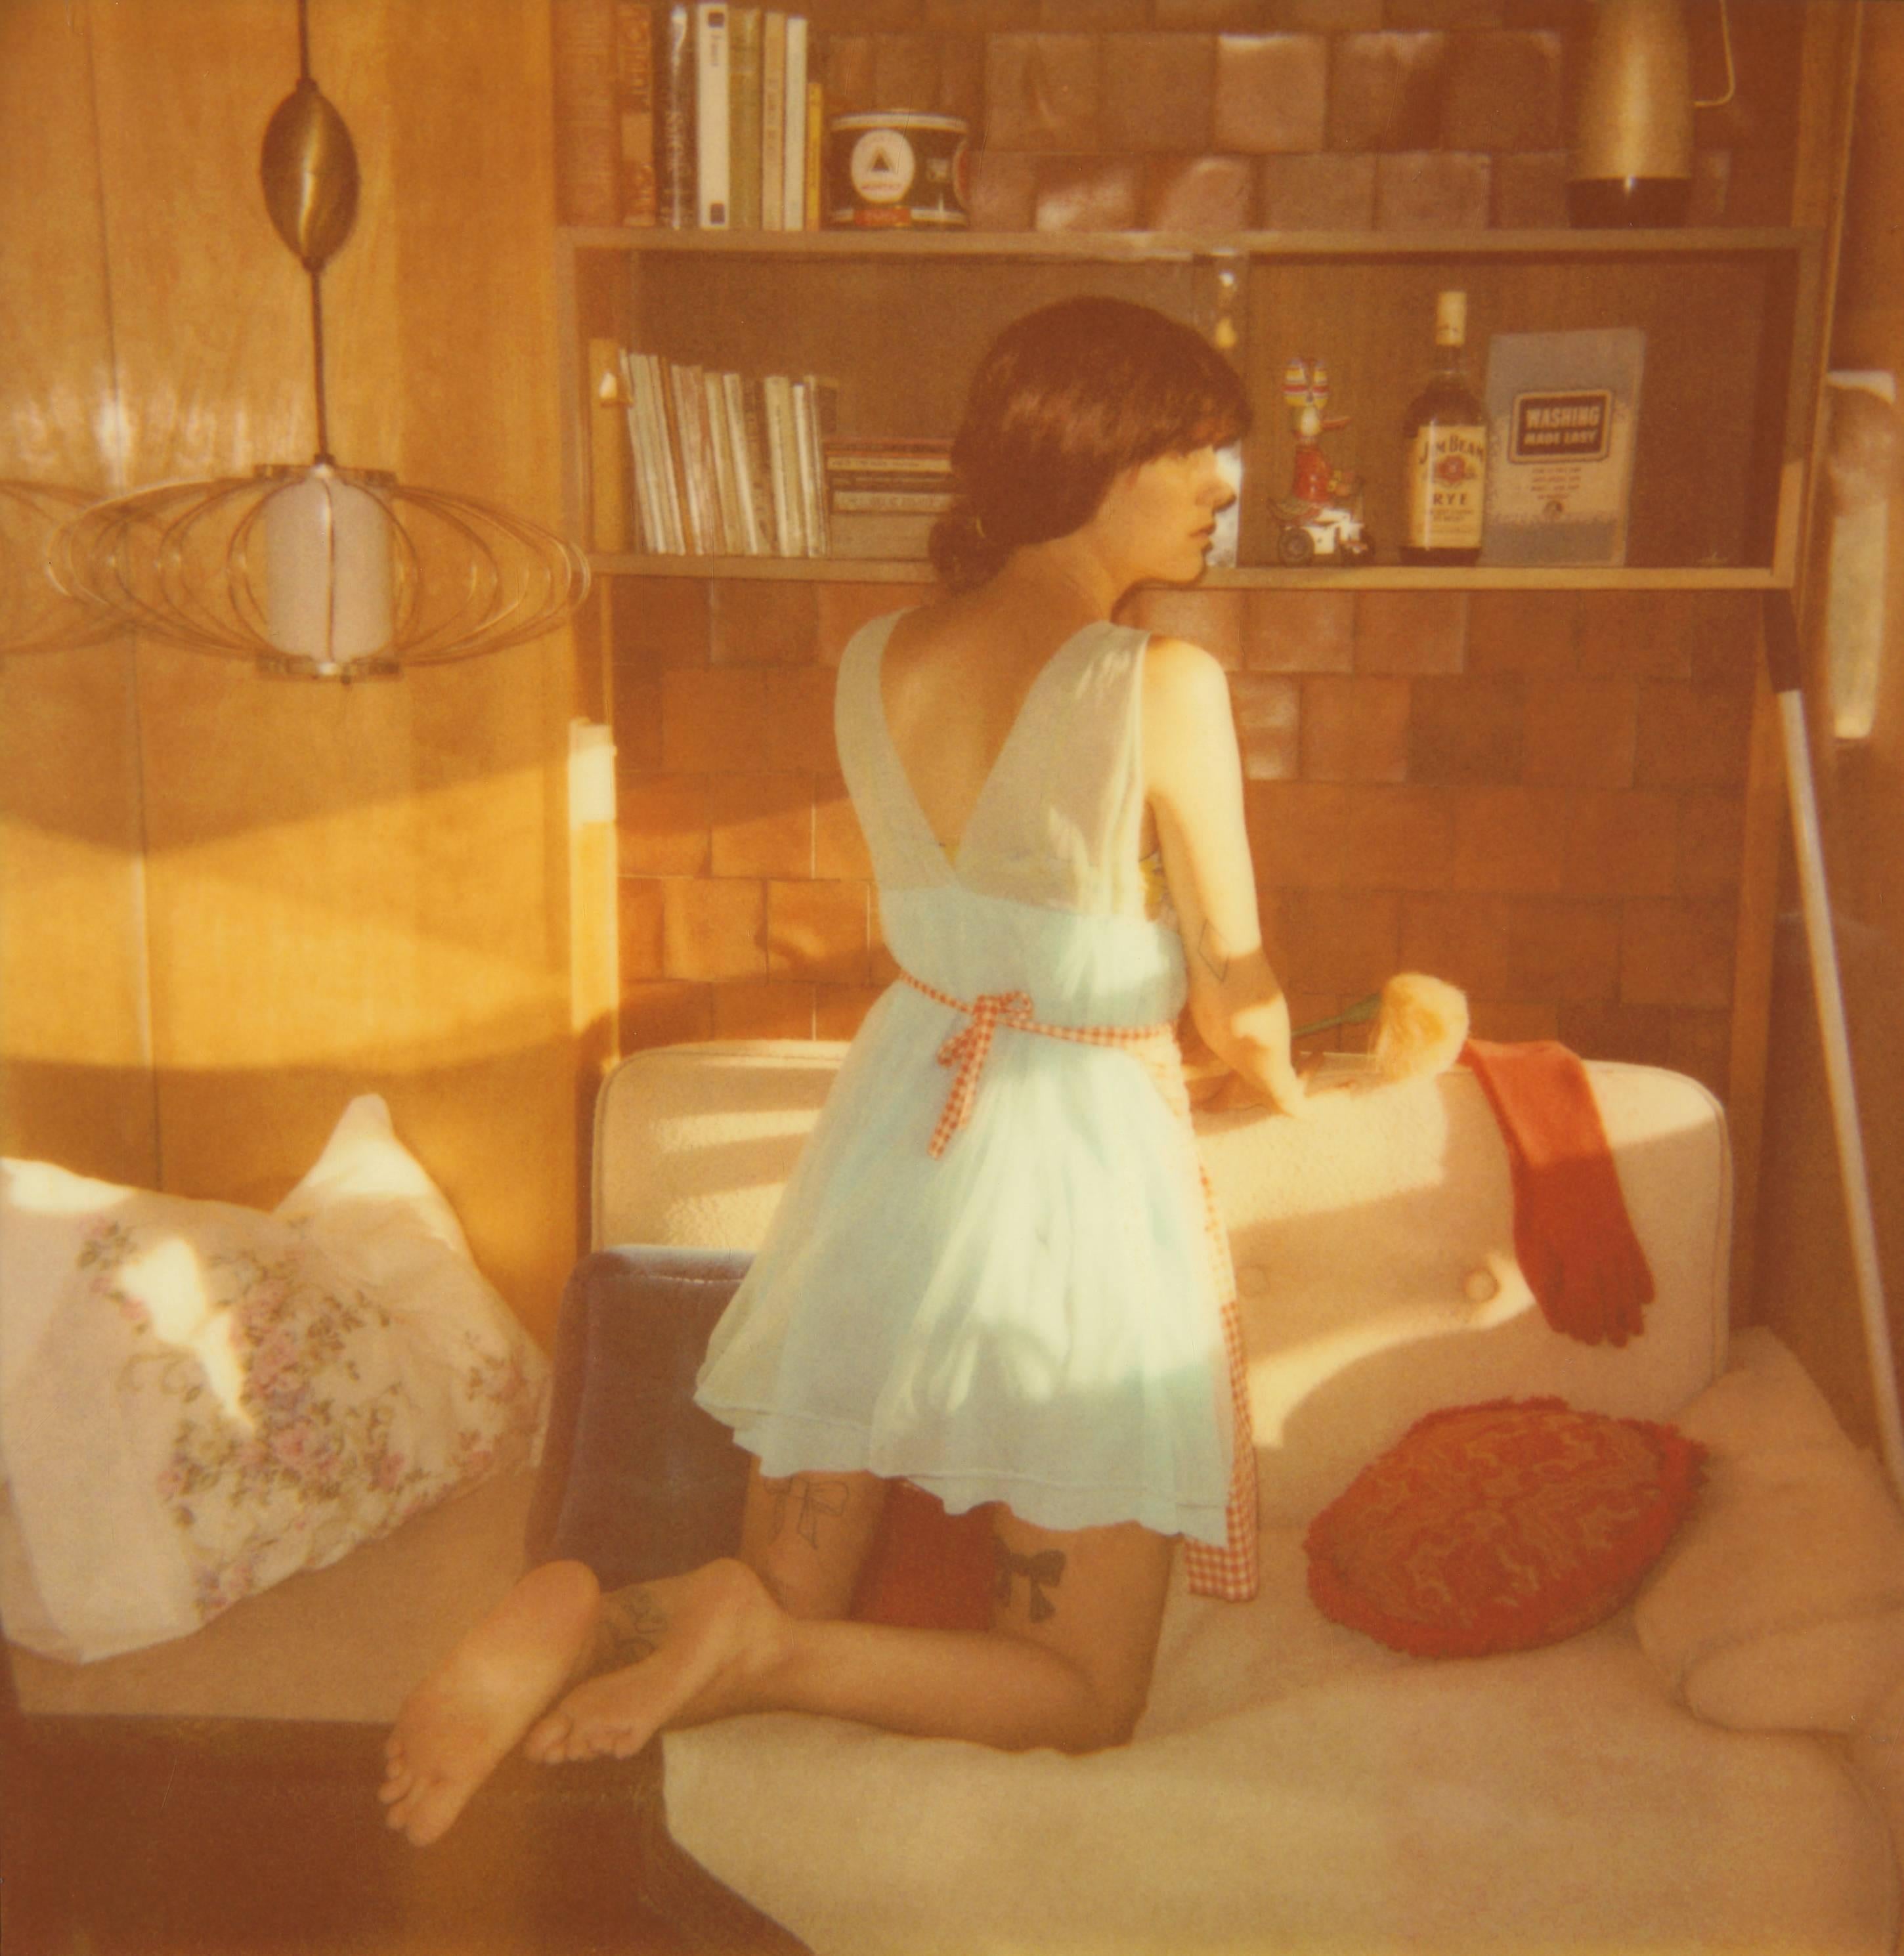 Stefanie Schneider Color Photograph - Dusting (The Girl behind the White Picket Fence) - Polaroid, Contemporary, Color